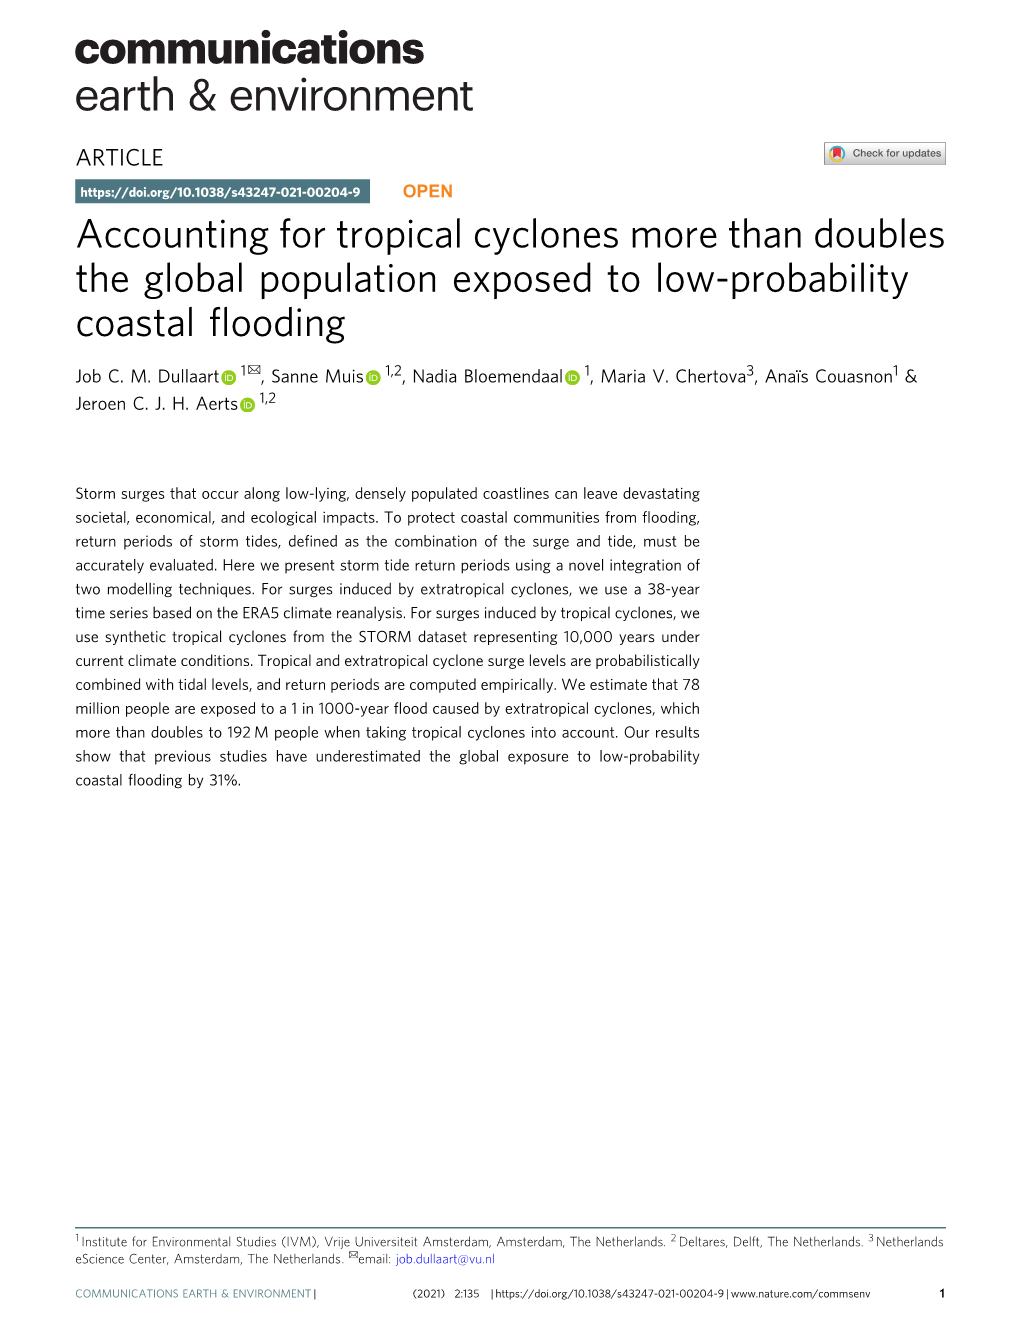 Accounting for Tropical Cyclones More Than Doubles the Global Population Exposed to Low-Probability Coastal Flooding